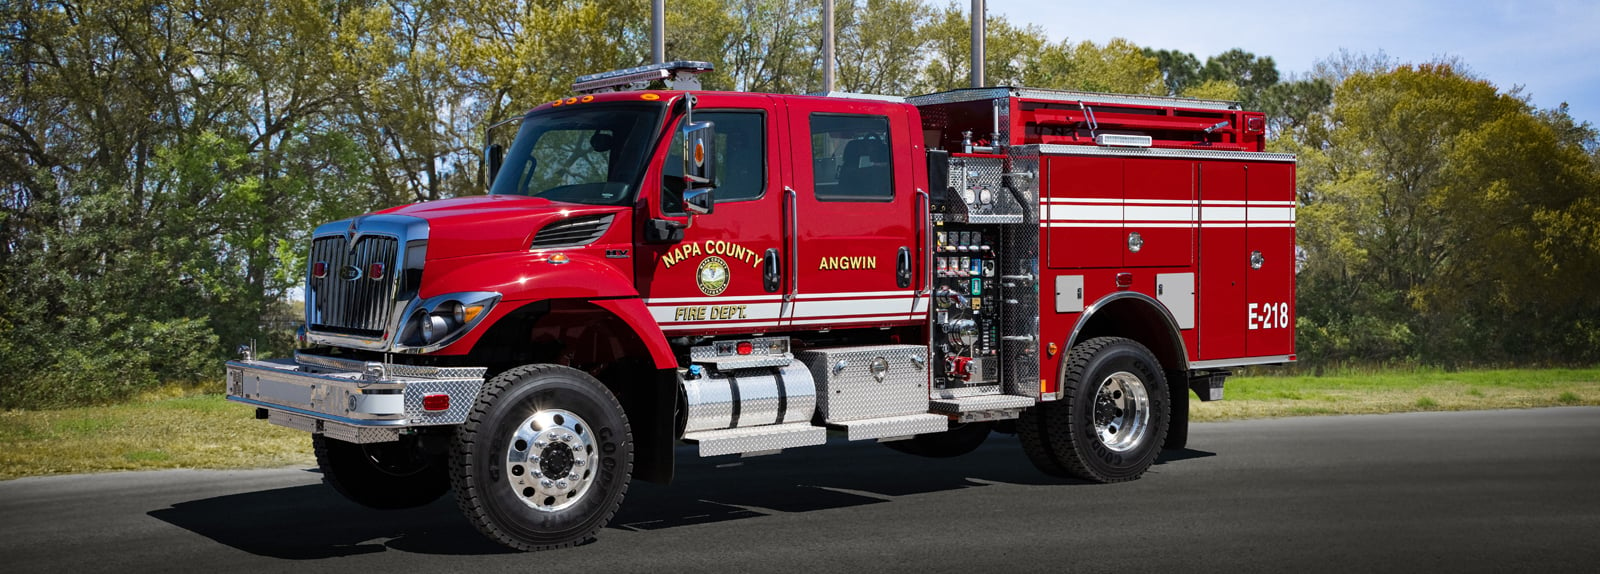 Types of Fire Trucks: An Overview Comparison